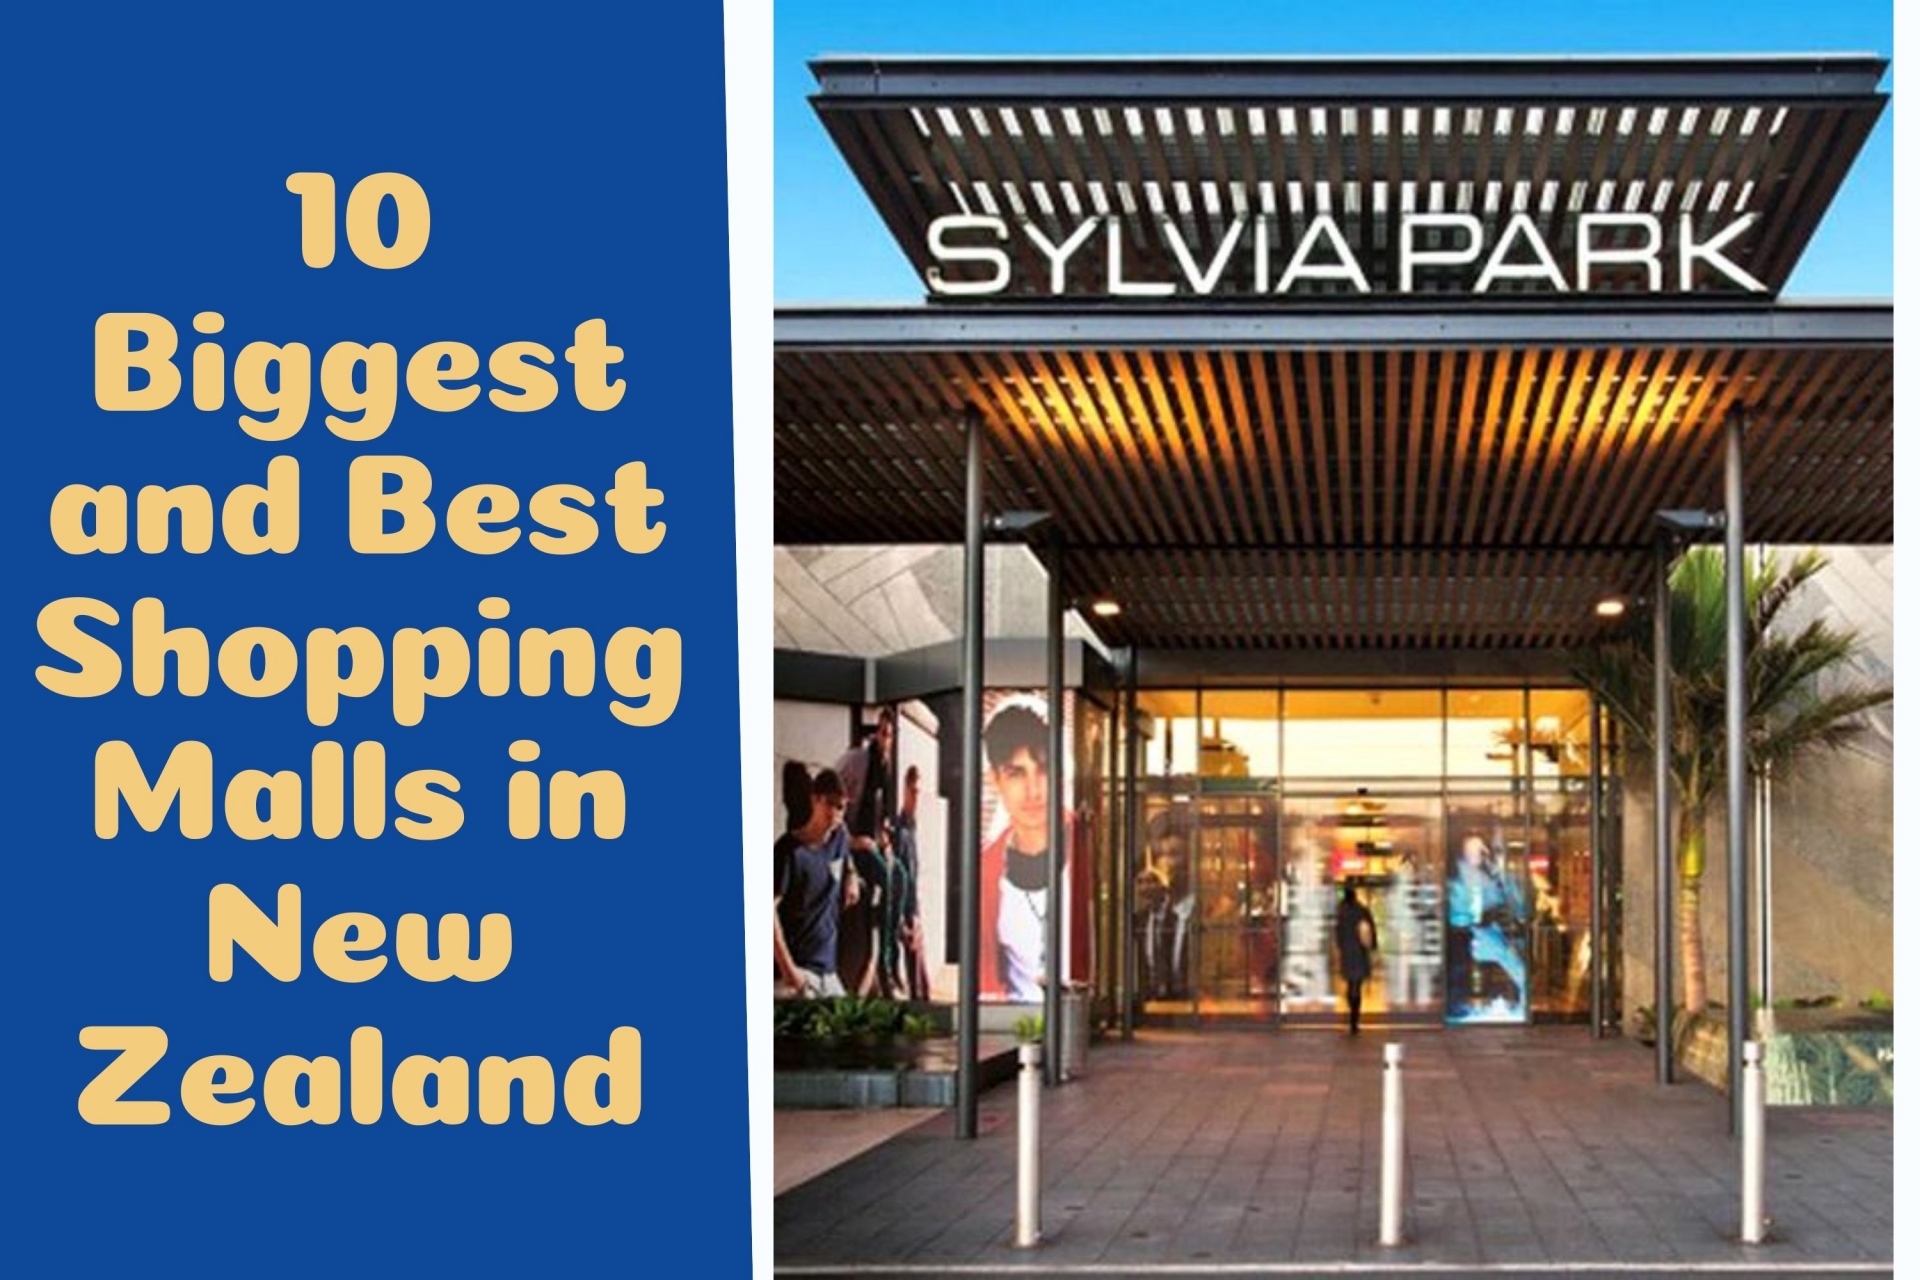 10 Biggest & Best Shopping Malls For Foreigner in New Zealand